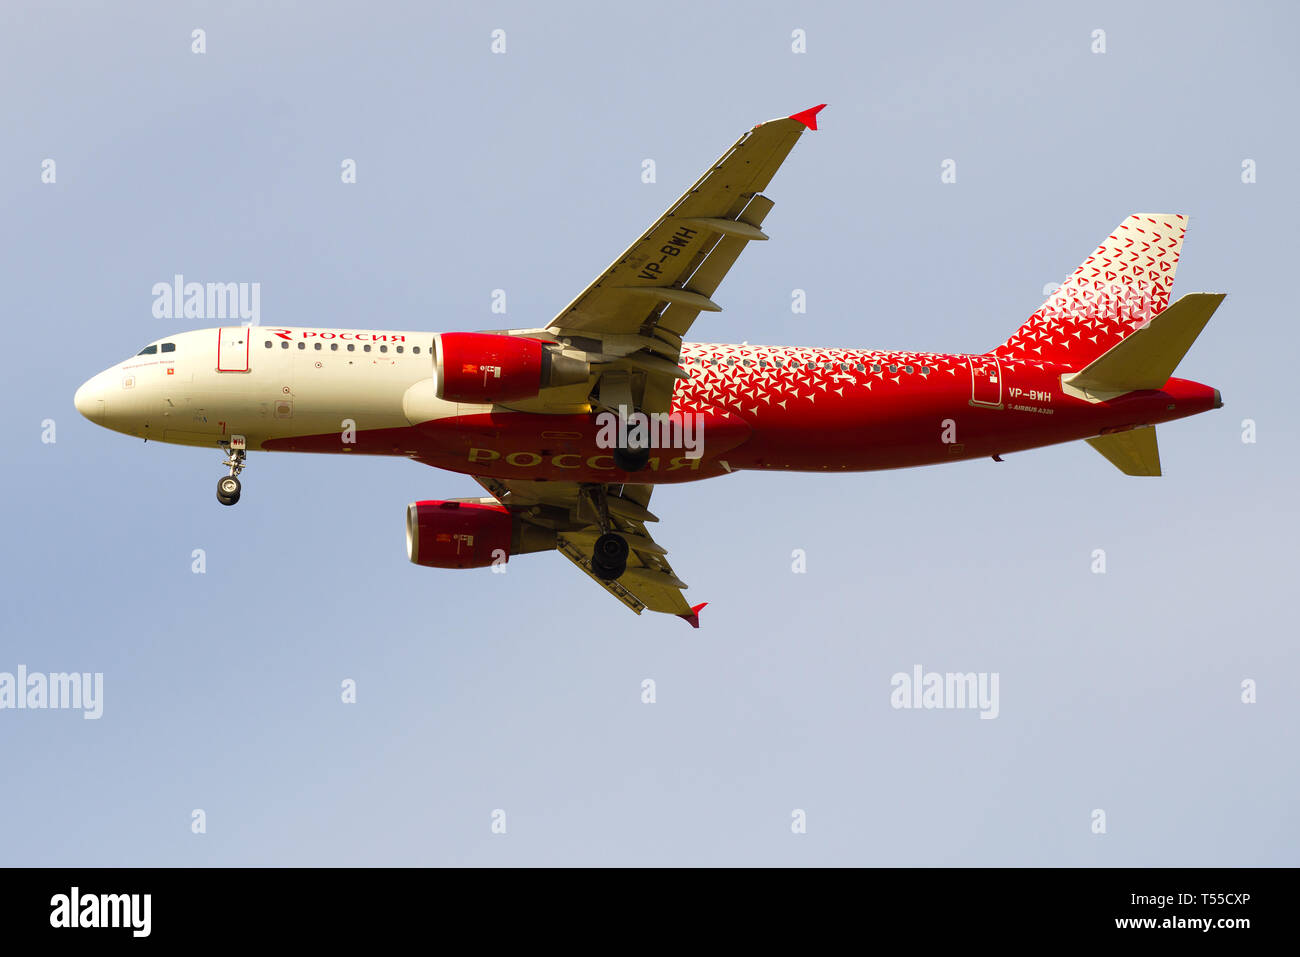 SAINT-PETERSBURG, RUSSIA - MAY 08, 2018: Airbus A320-214 Mineralnye Vody (VP-BWH) aircraft of the Rossiya airline close-up before landing at Pulkovo a Stock Photo